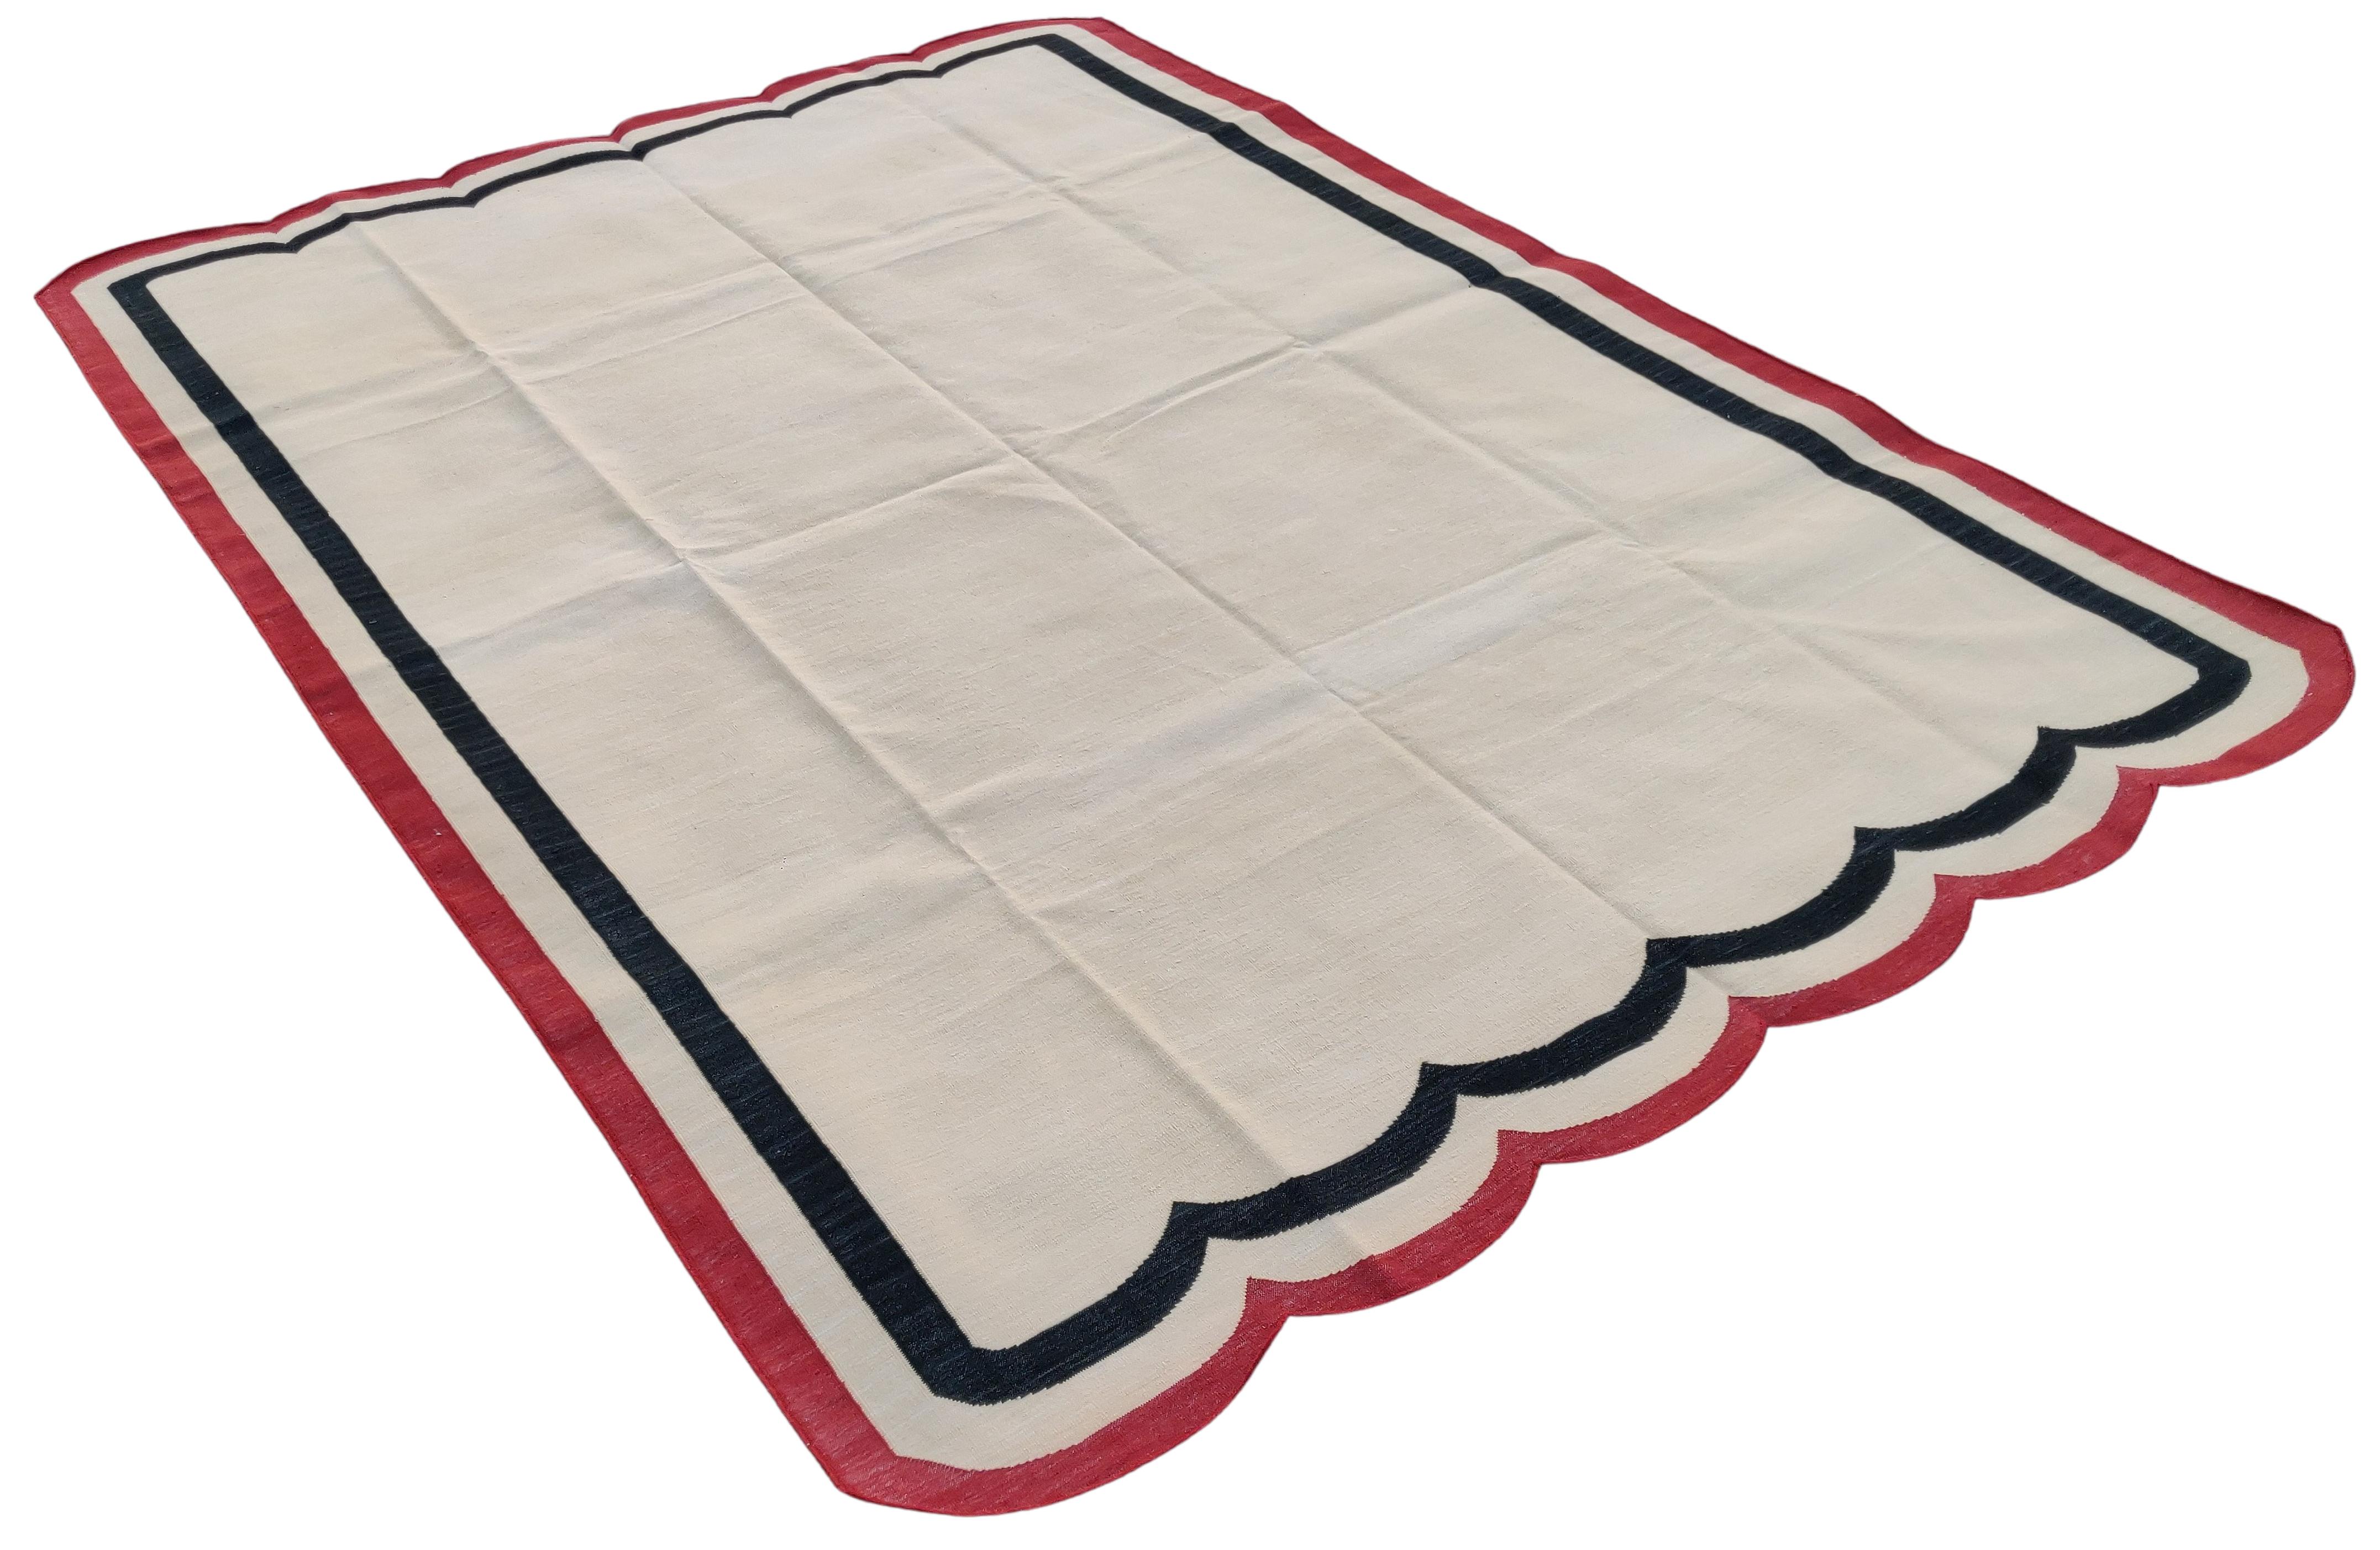 Cotton Vegetable Dyed Cream, Black And Red Two Sided Scalloped Rug-6'x9' 
(Scallops runs on 6 Feet Sides)
These special flat-weave dhurries are hand-woven with 15 ply 100% cotton yarn. Due to the special manufacturing techniques used to create our